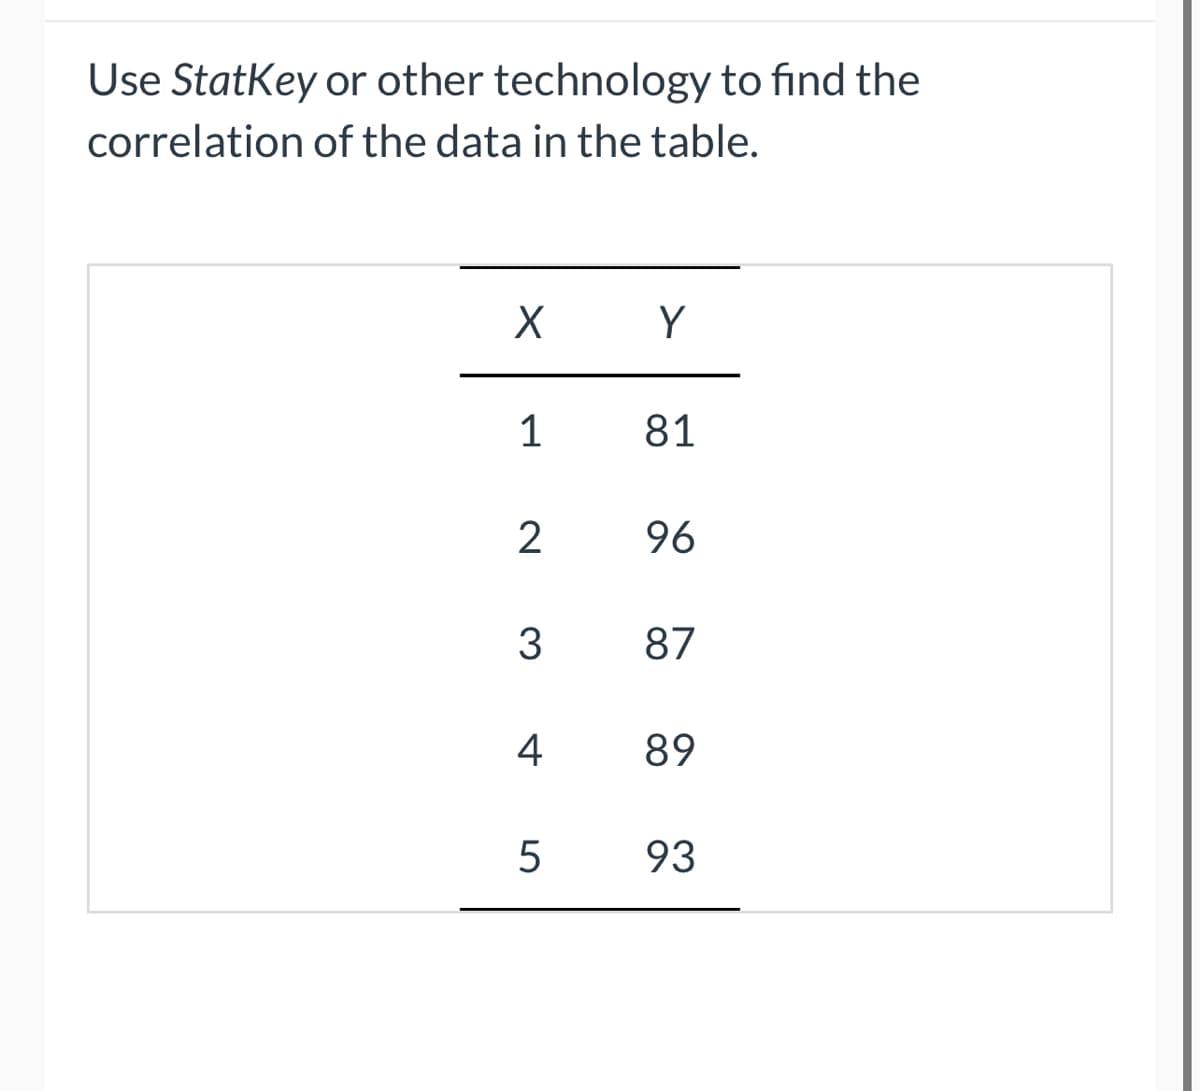 Use StatKey or other technology to find the
of the data in the table.
correlation
X
1
2
3
4
5
Y
81
96
87
89
93